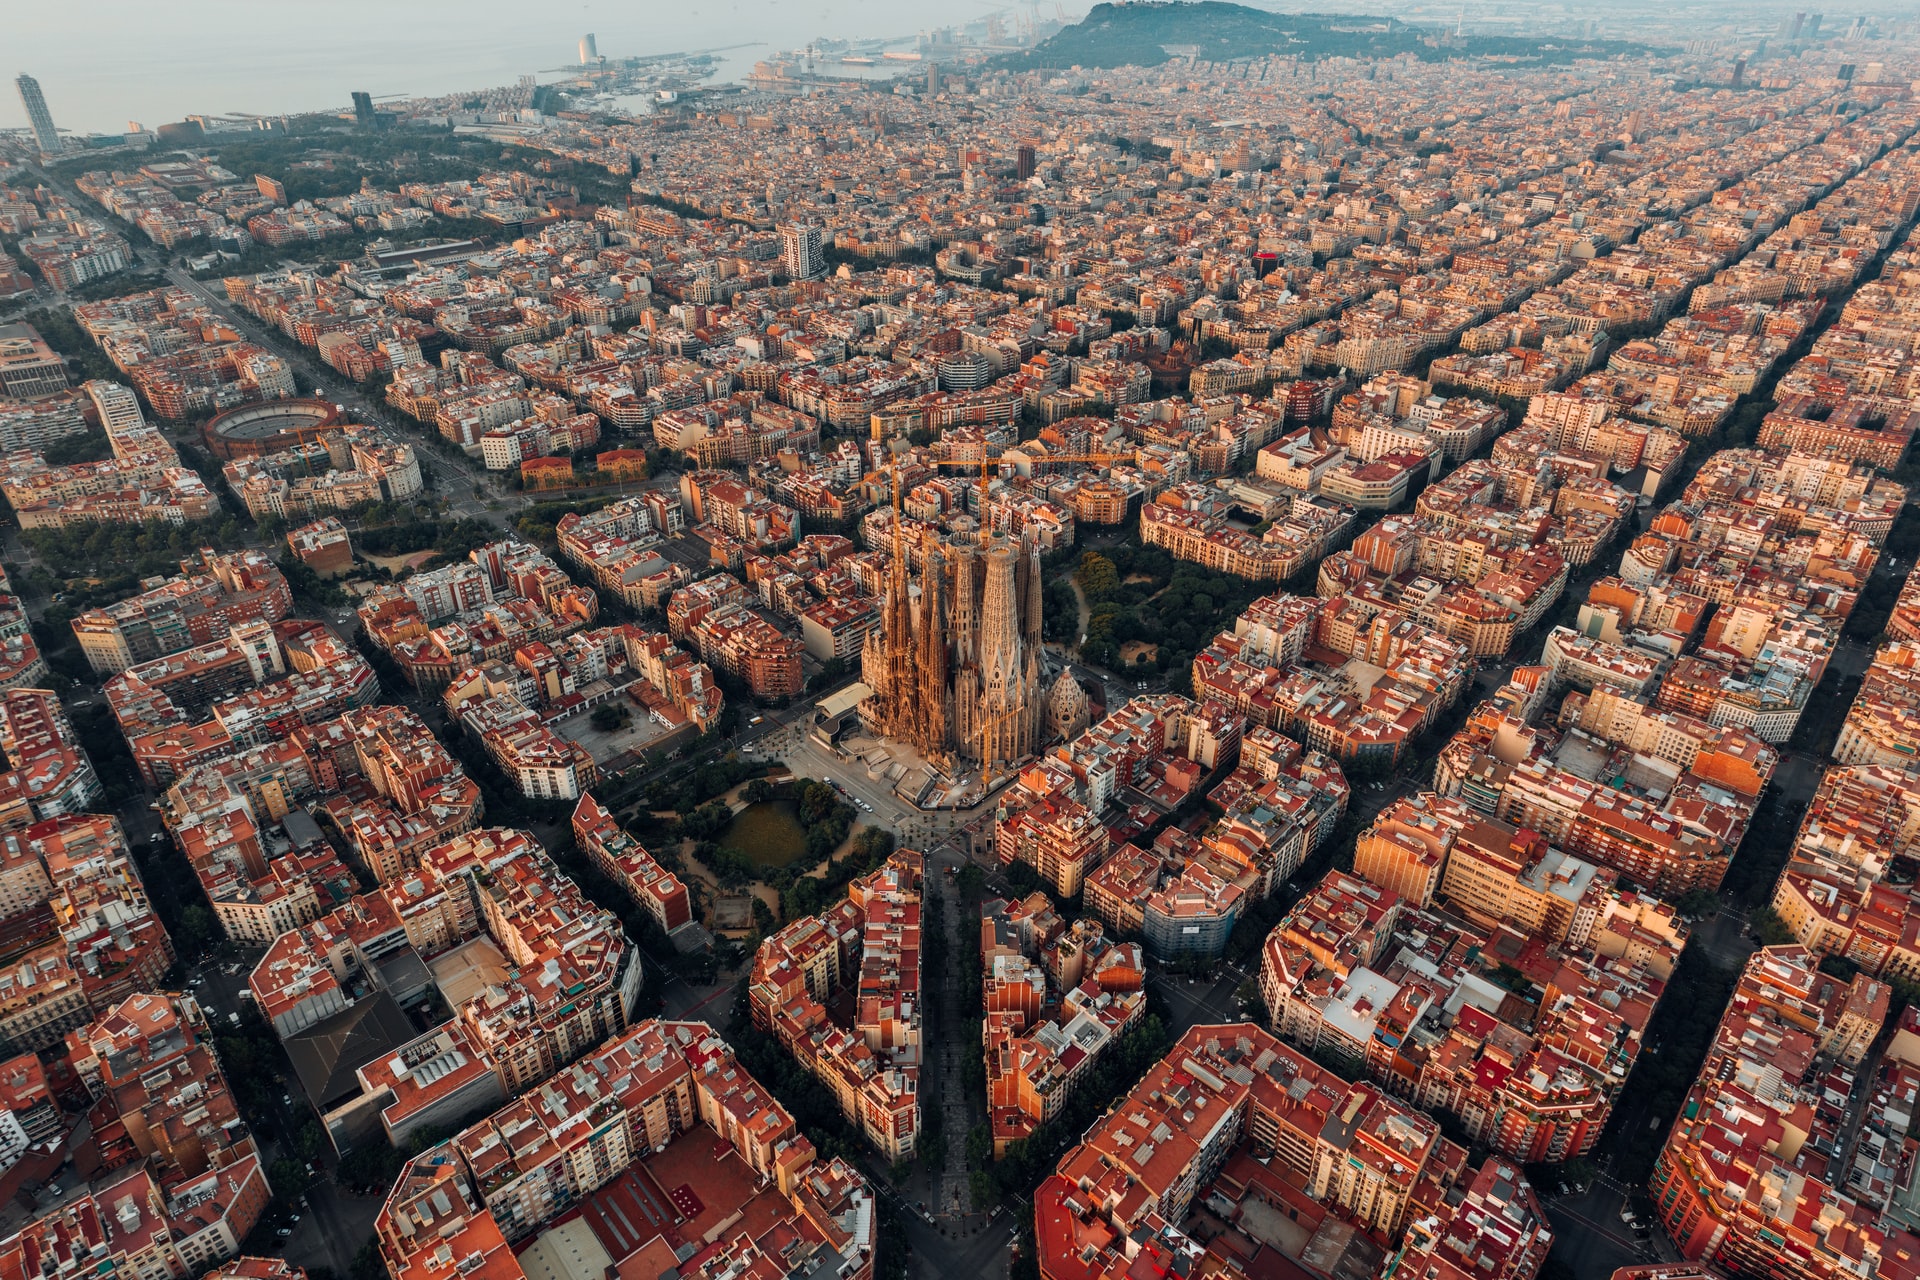 The Sagrada Familia church is probably the first image that comes to mind when you think of Barcelona